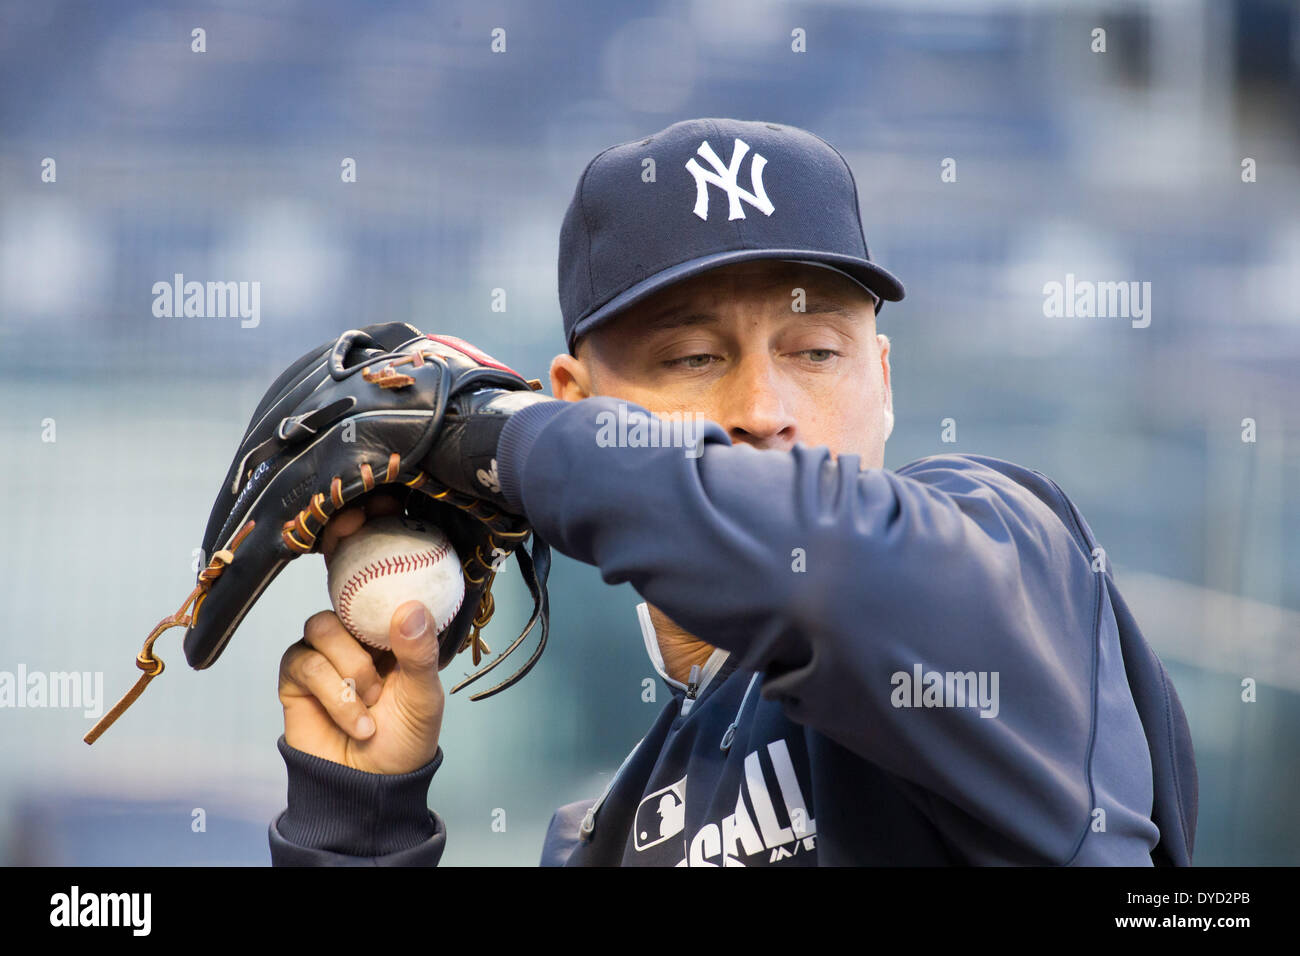 Bronx, New York, USA. 10th Apr, 2014. Derek Jeter (Yankees) MLB : Derek Jeter of the New York Yankees during practice before the baseball game against the Baltimore Orioles at Yankee Stadium in Bronx, New York, United States . © Thomas Anderson/AFLO/Alamy Live News Stock Photo